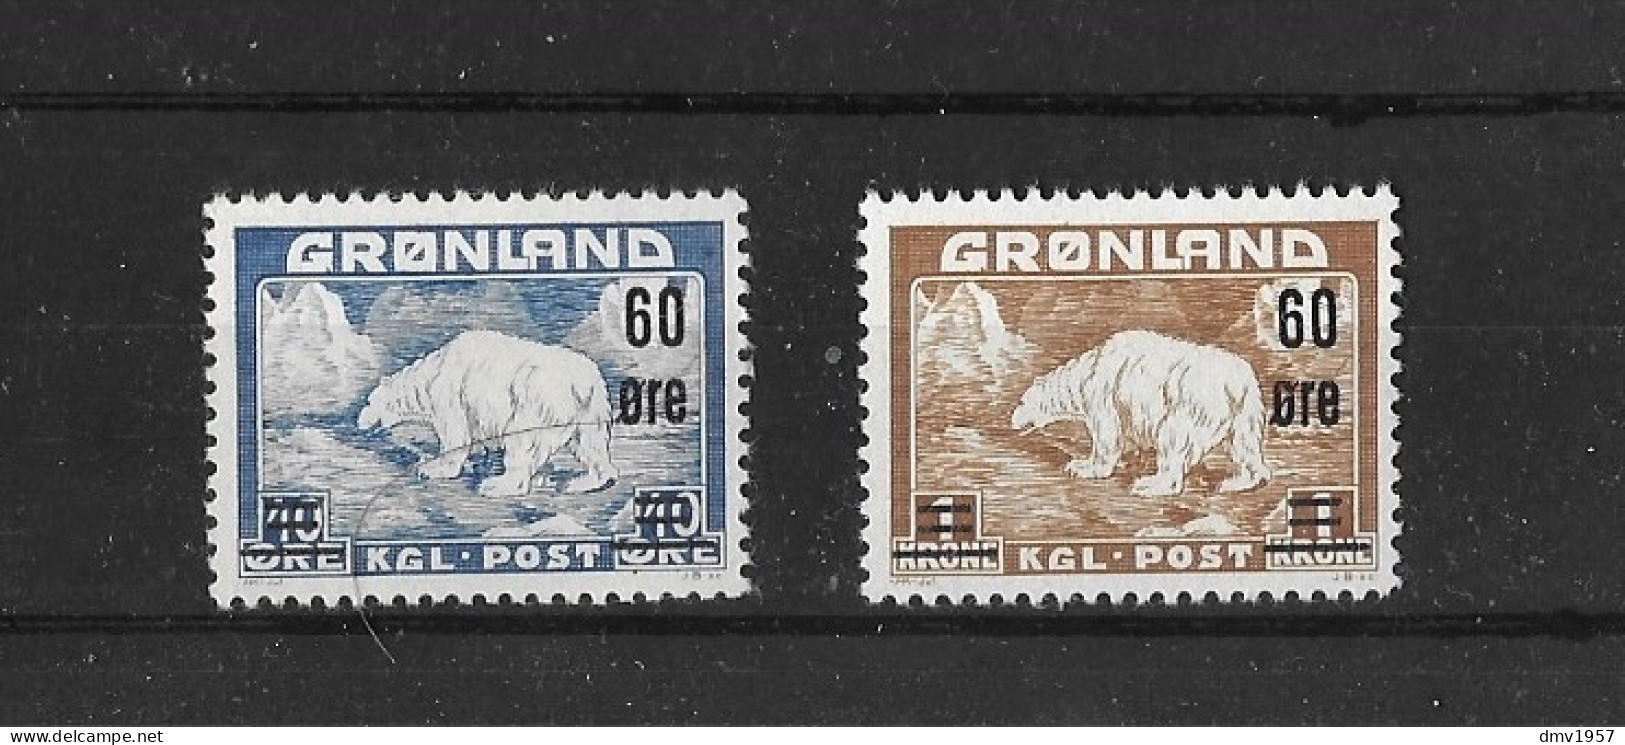 Greenland 1956 MNH Sg 6a & 7 Surch 60 Ore Sg 37/8 Cat £110+ - Unused Stamps